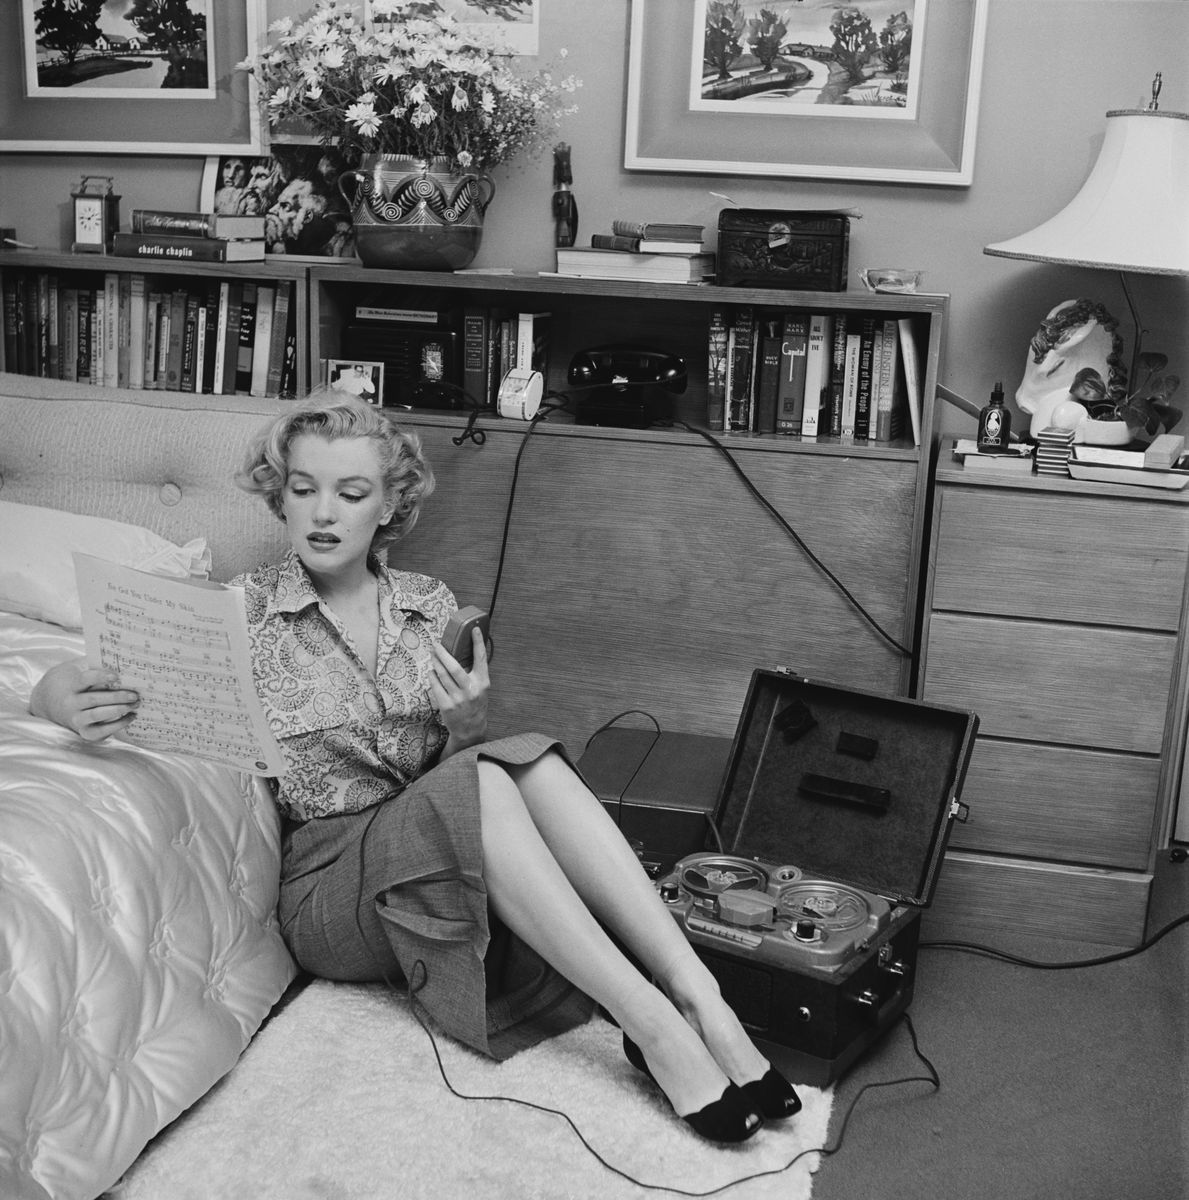 American actress Marilyn Monroe (1926 - 1962) read sheet music while sitting on a bedroom floor with a tape player on the side circa 1950. 